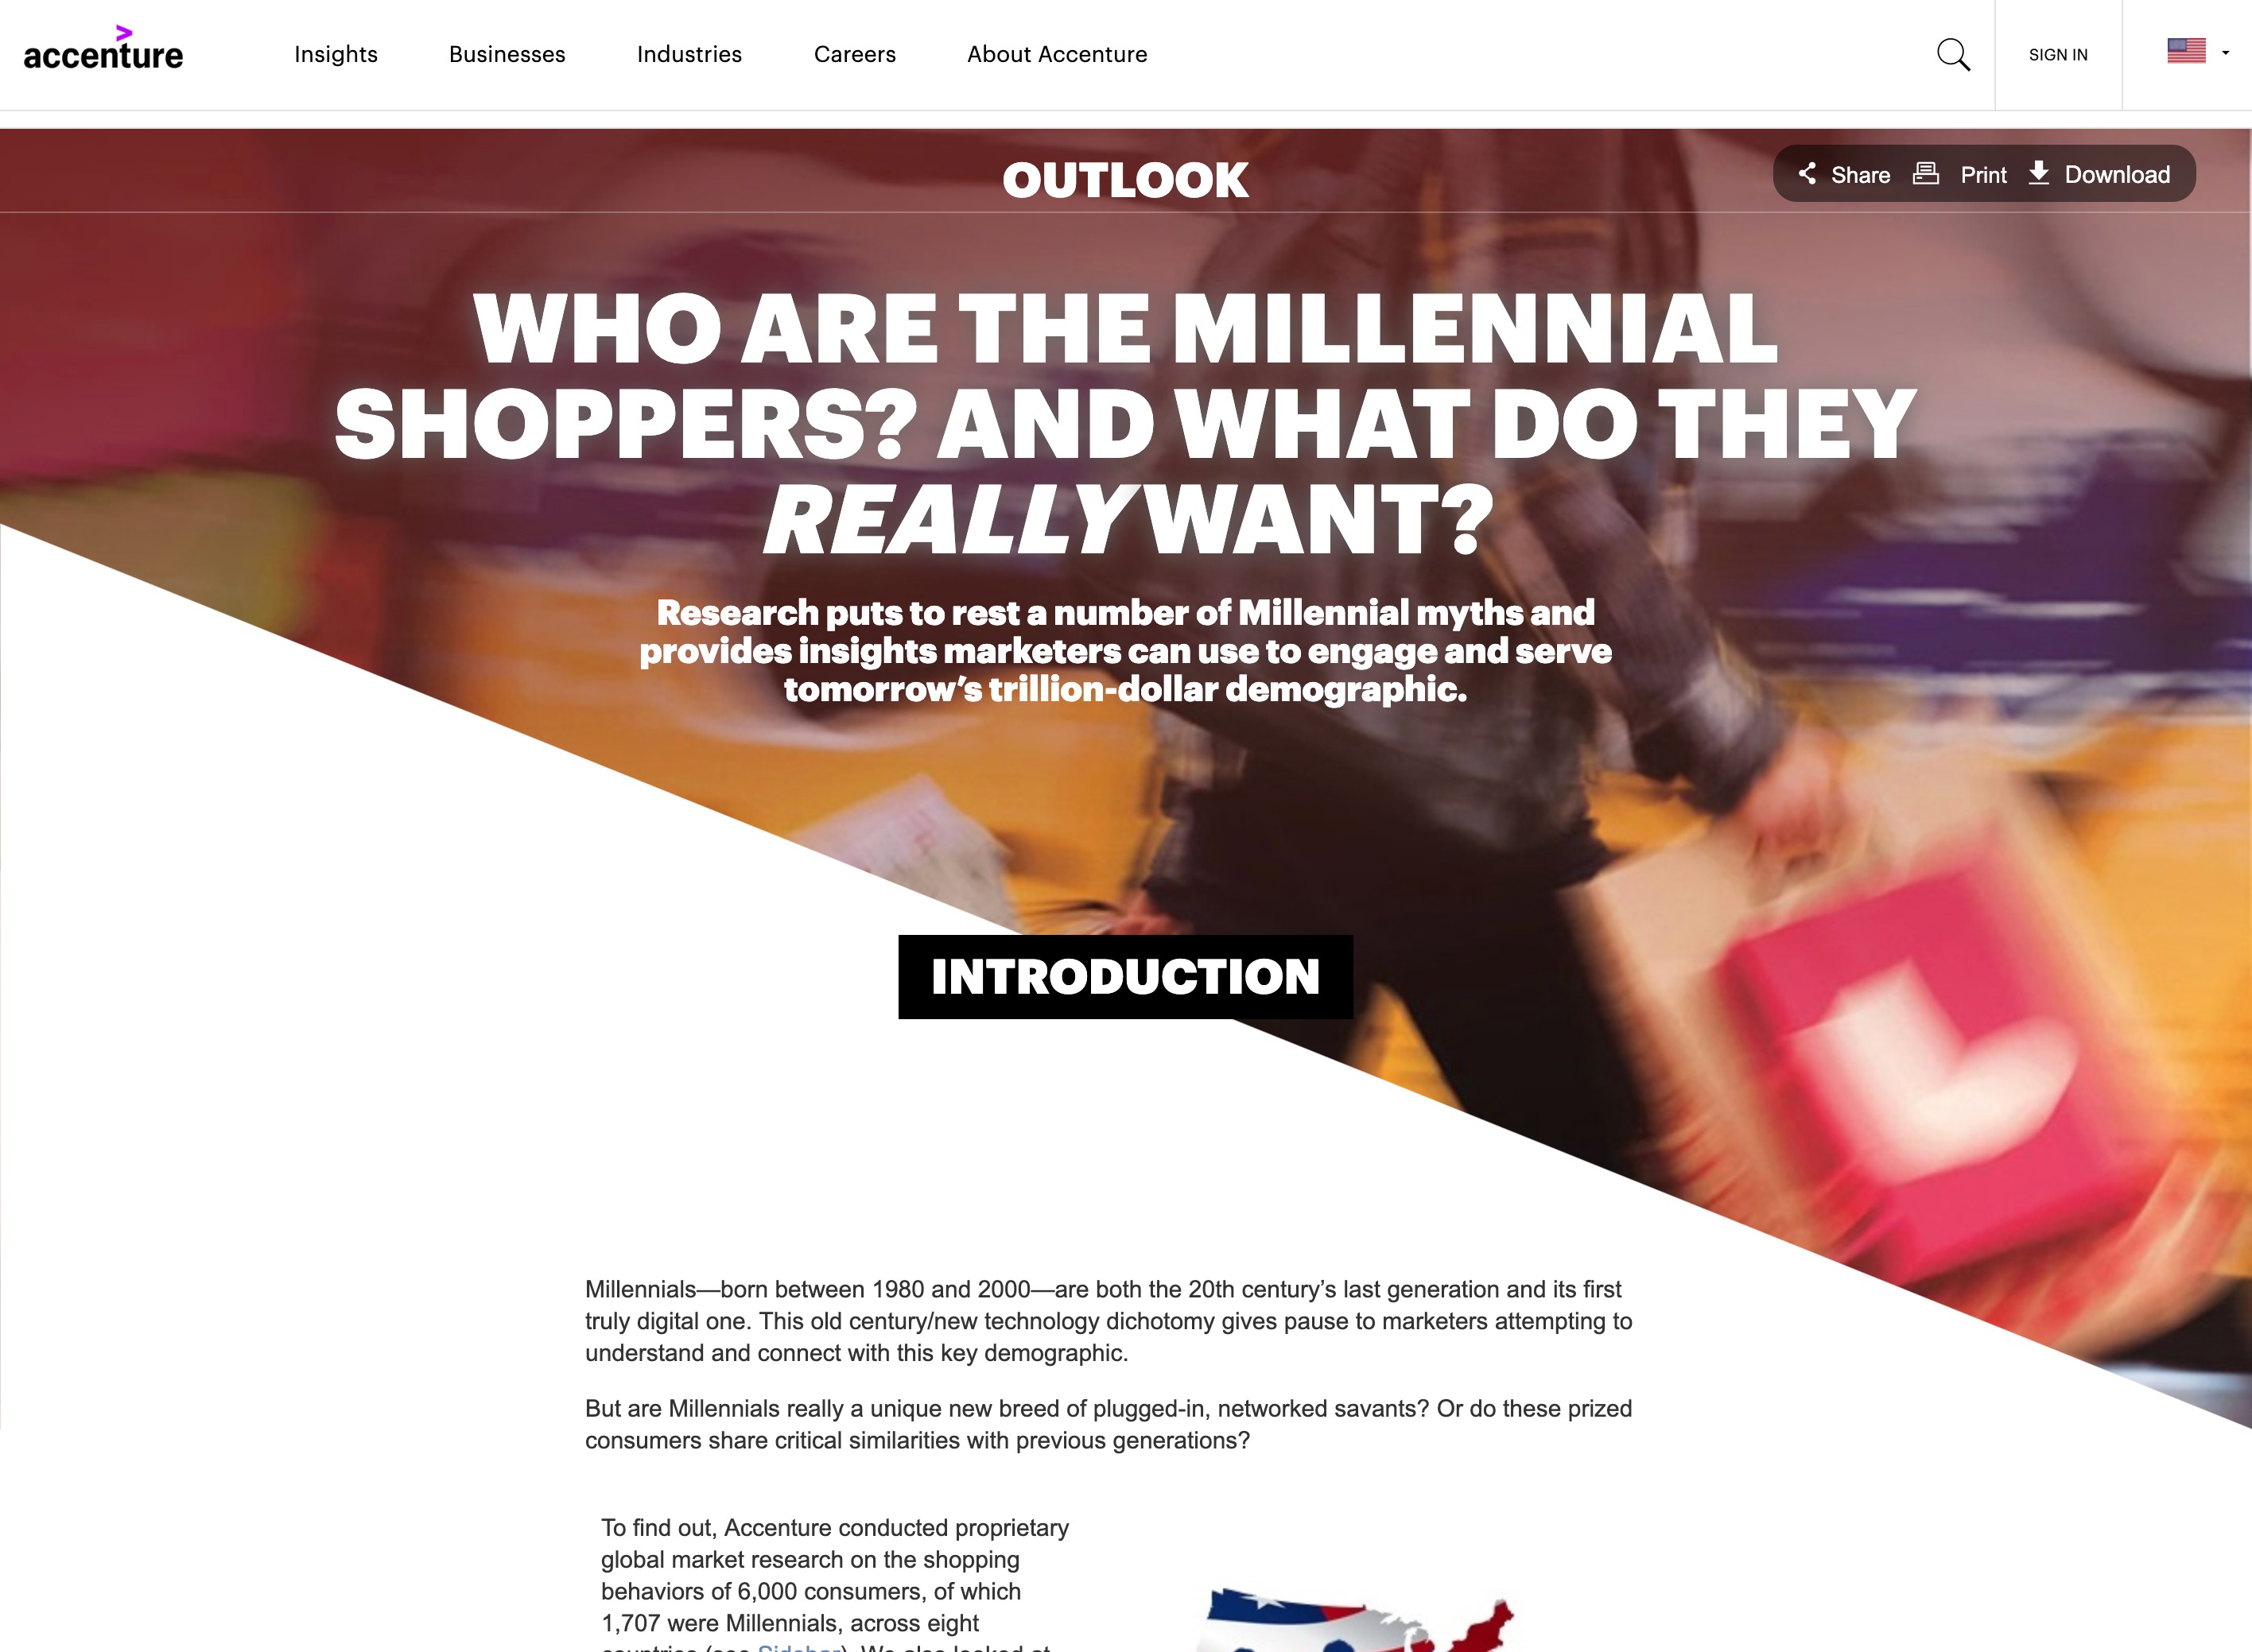 「Who are the Millennial shoppers? And what do they really want?」